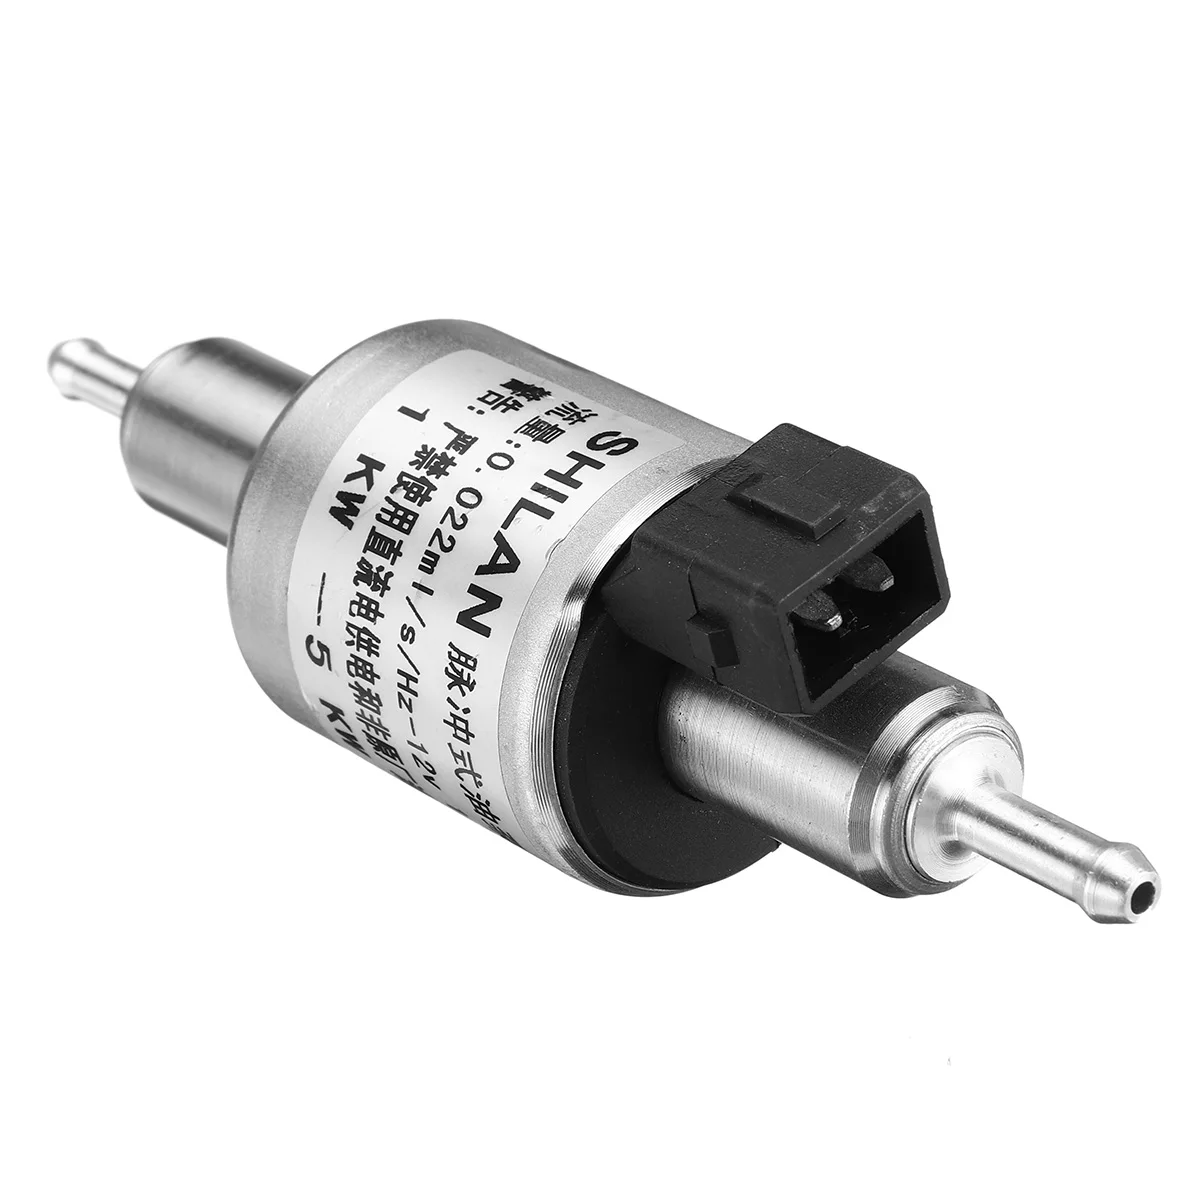 12V/24V 2000W 5000W For Webastos Eberspacher Electric Heater Oil Fuel Pump Air Parking Heater Car Styling Accessories